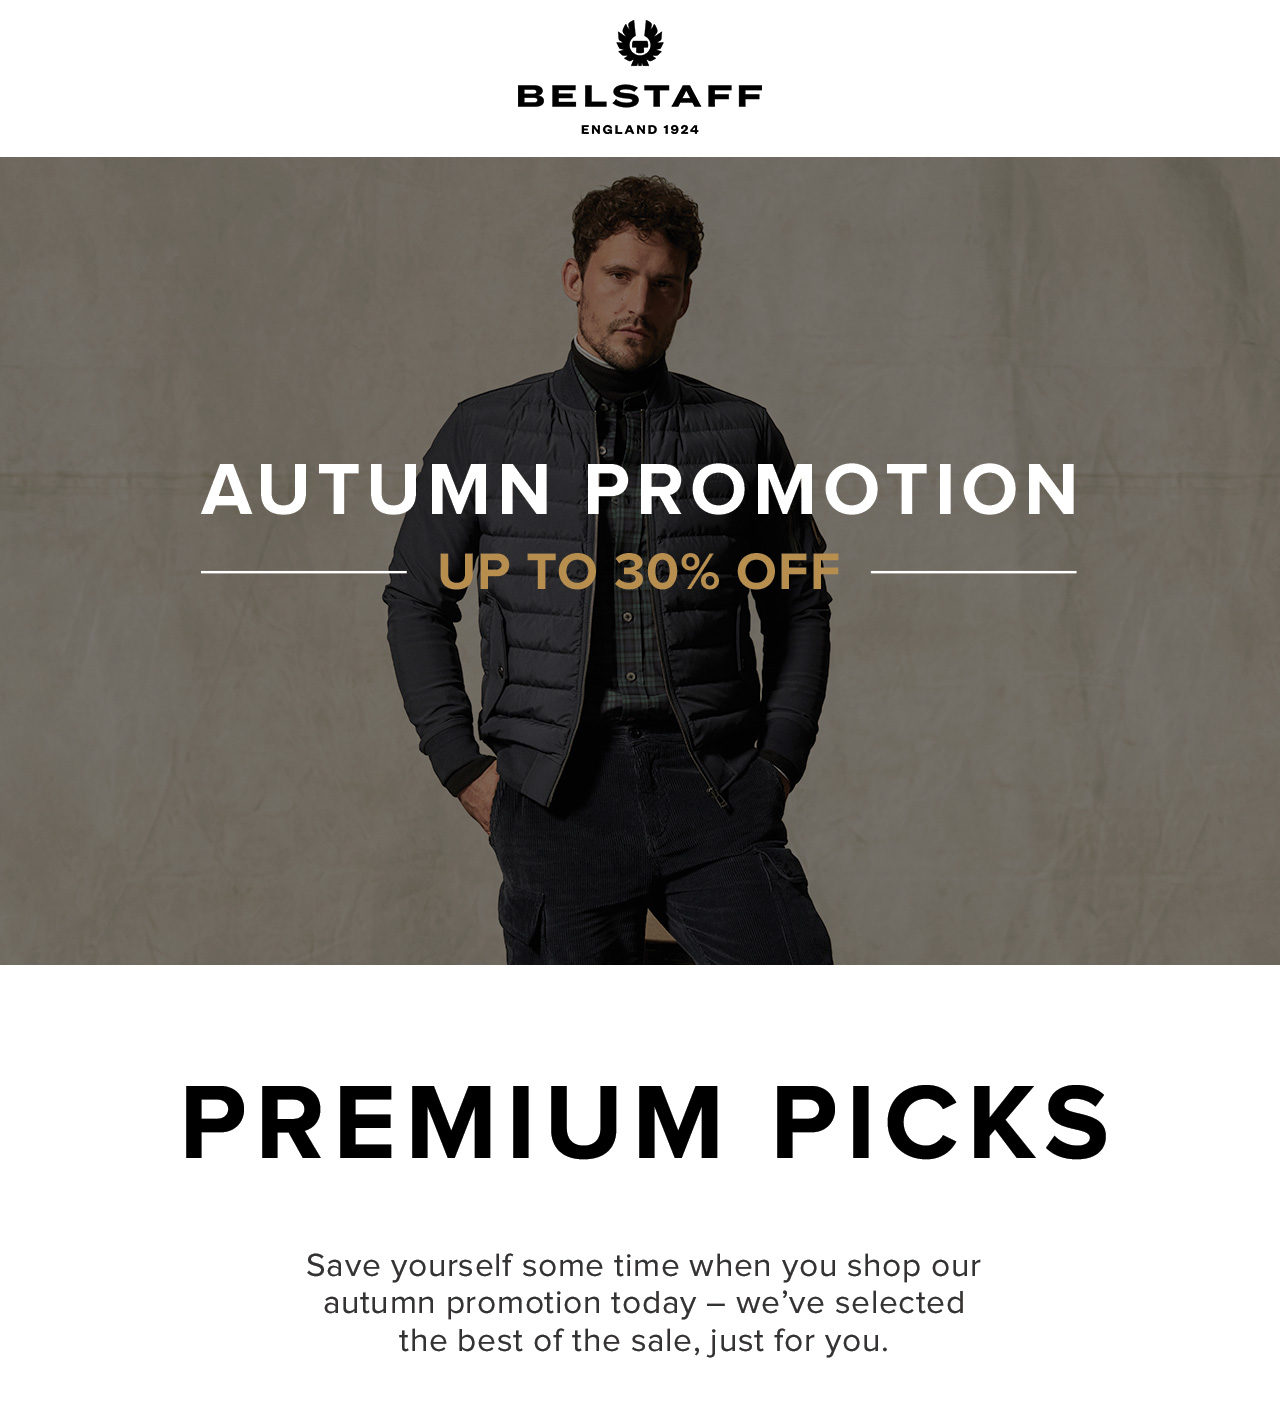 ?Save yourself some time when you shop our autumn promotion today - we've selected the best of the sale, just for you.